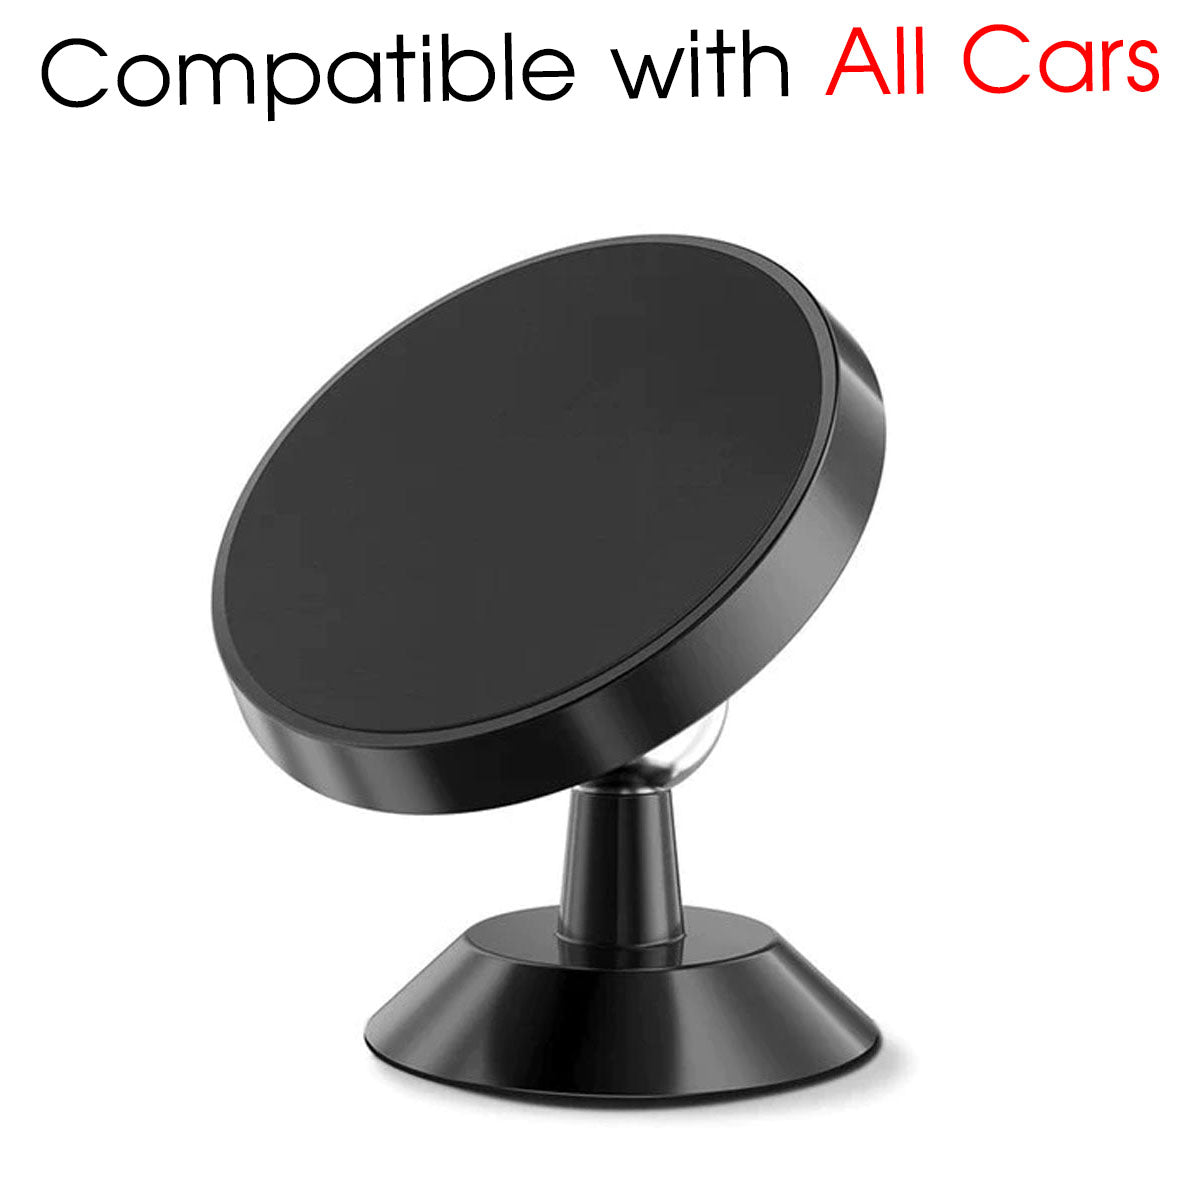 [2 Pack ] Magnetic Phone Mount, Custom For Your Cars, [ Super Strong Magnet ] [ with 4 Metal Plate ] car Magnetic Phone Holder, [ 360° Rotation ] Universal Dashboard car Mount Fits All Cell Phones, Car Accessories PF13982